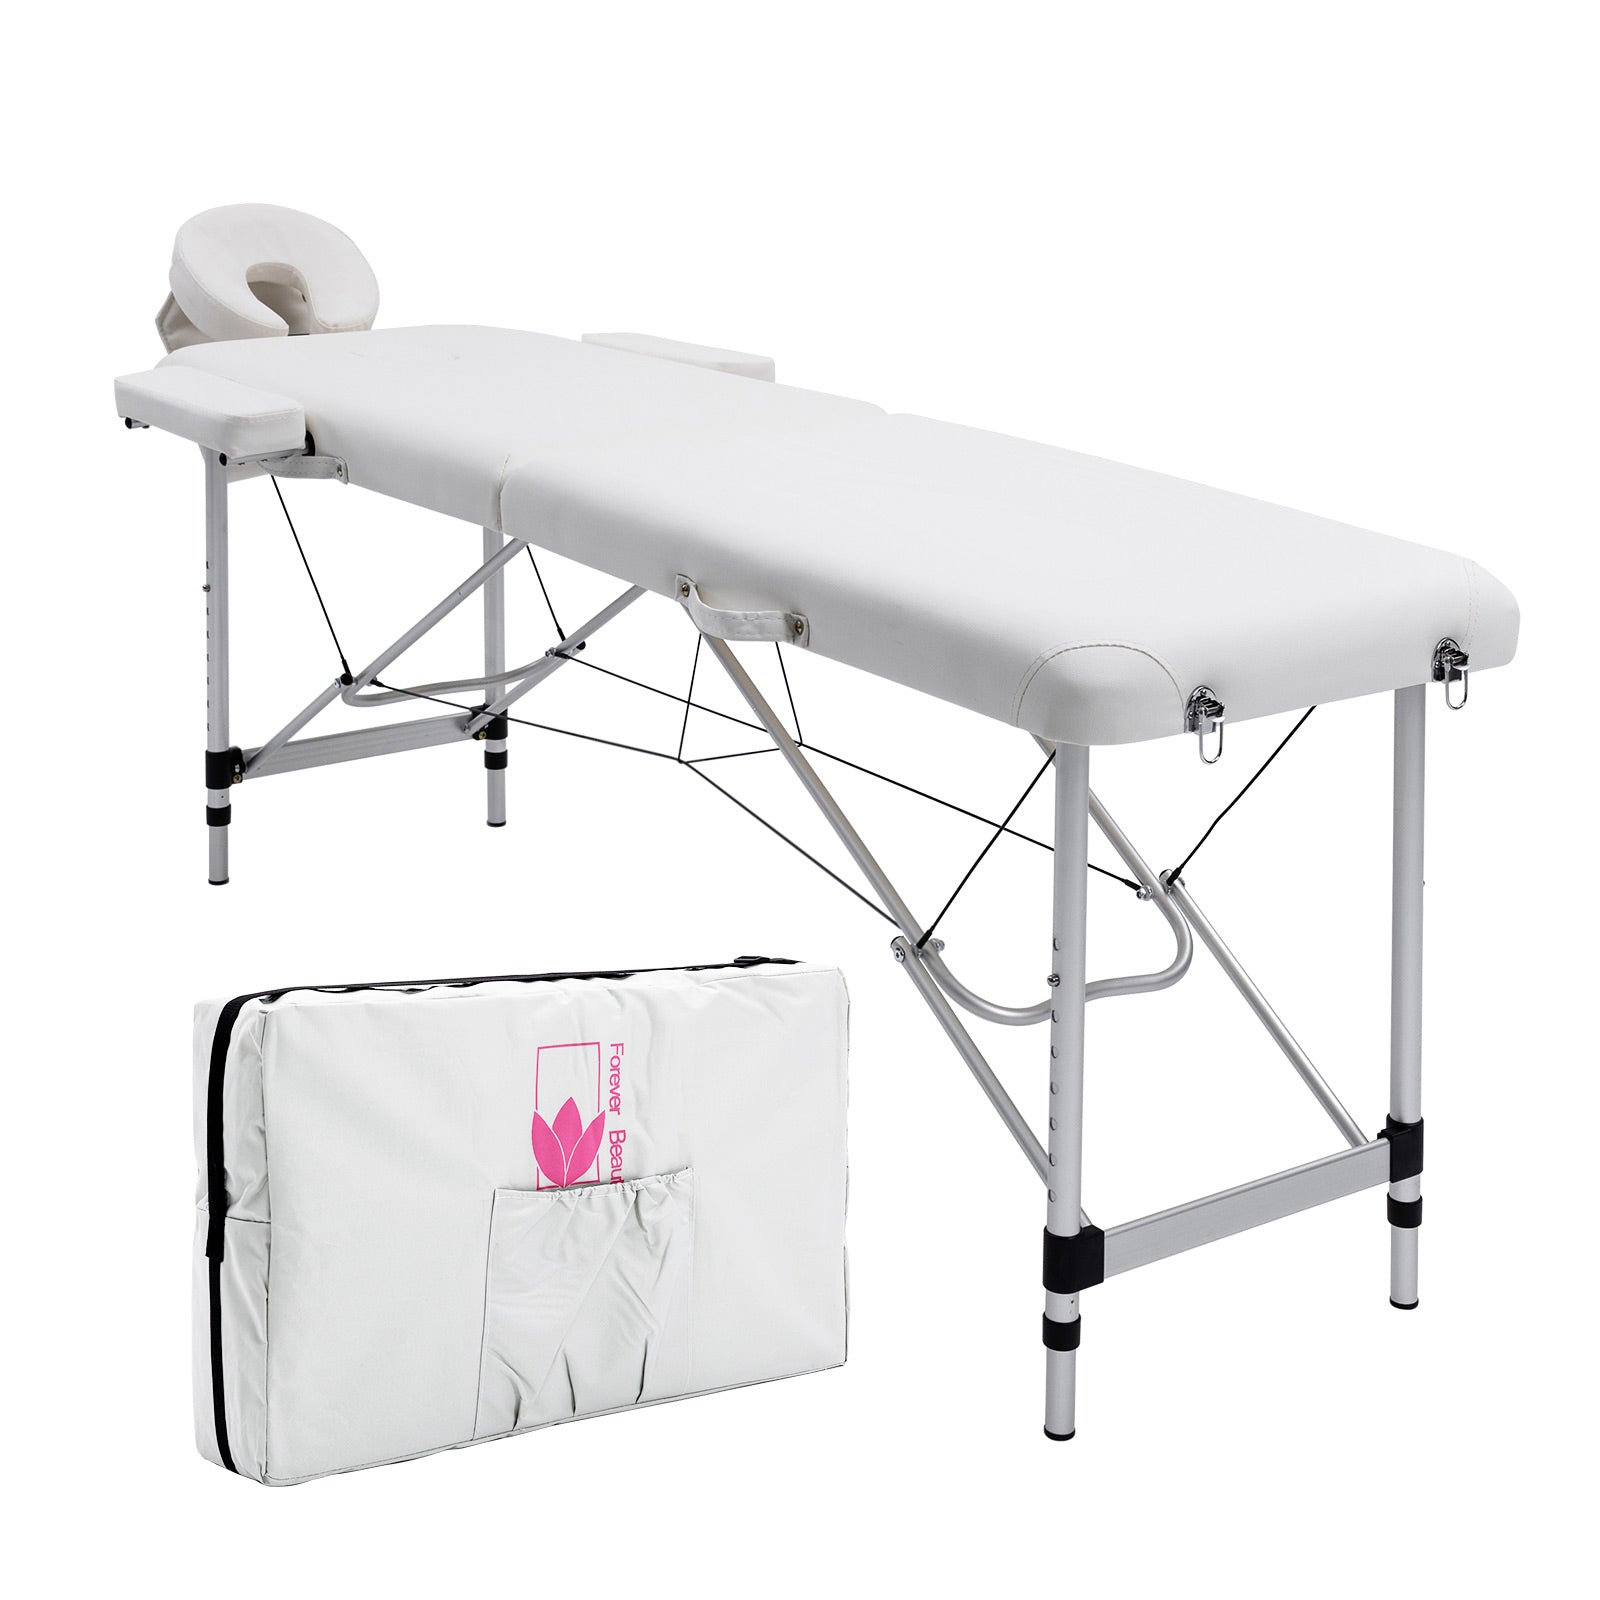 Forever Beauty White Portable Beauty Massage Table Bed Therapy Waxing 2 Fold 55cm Aluminium